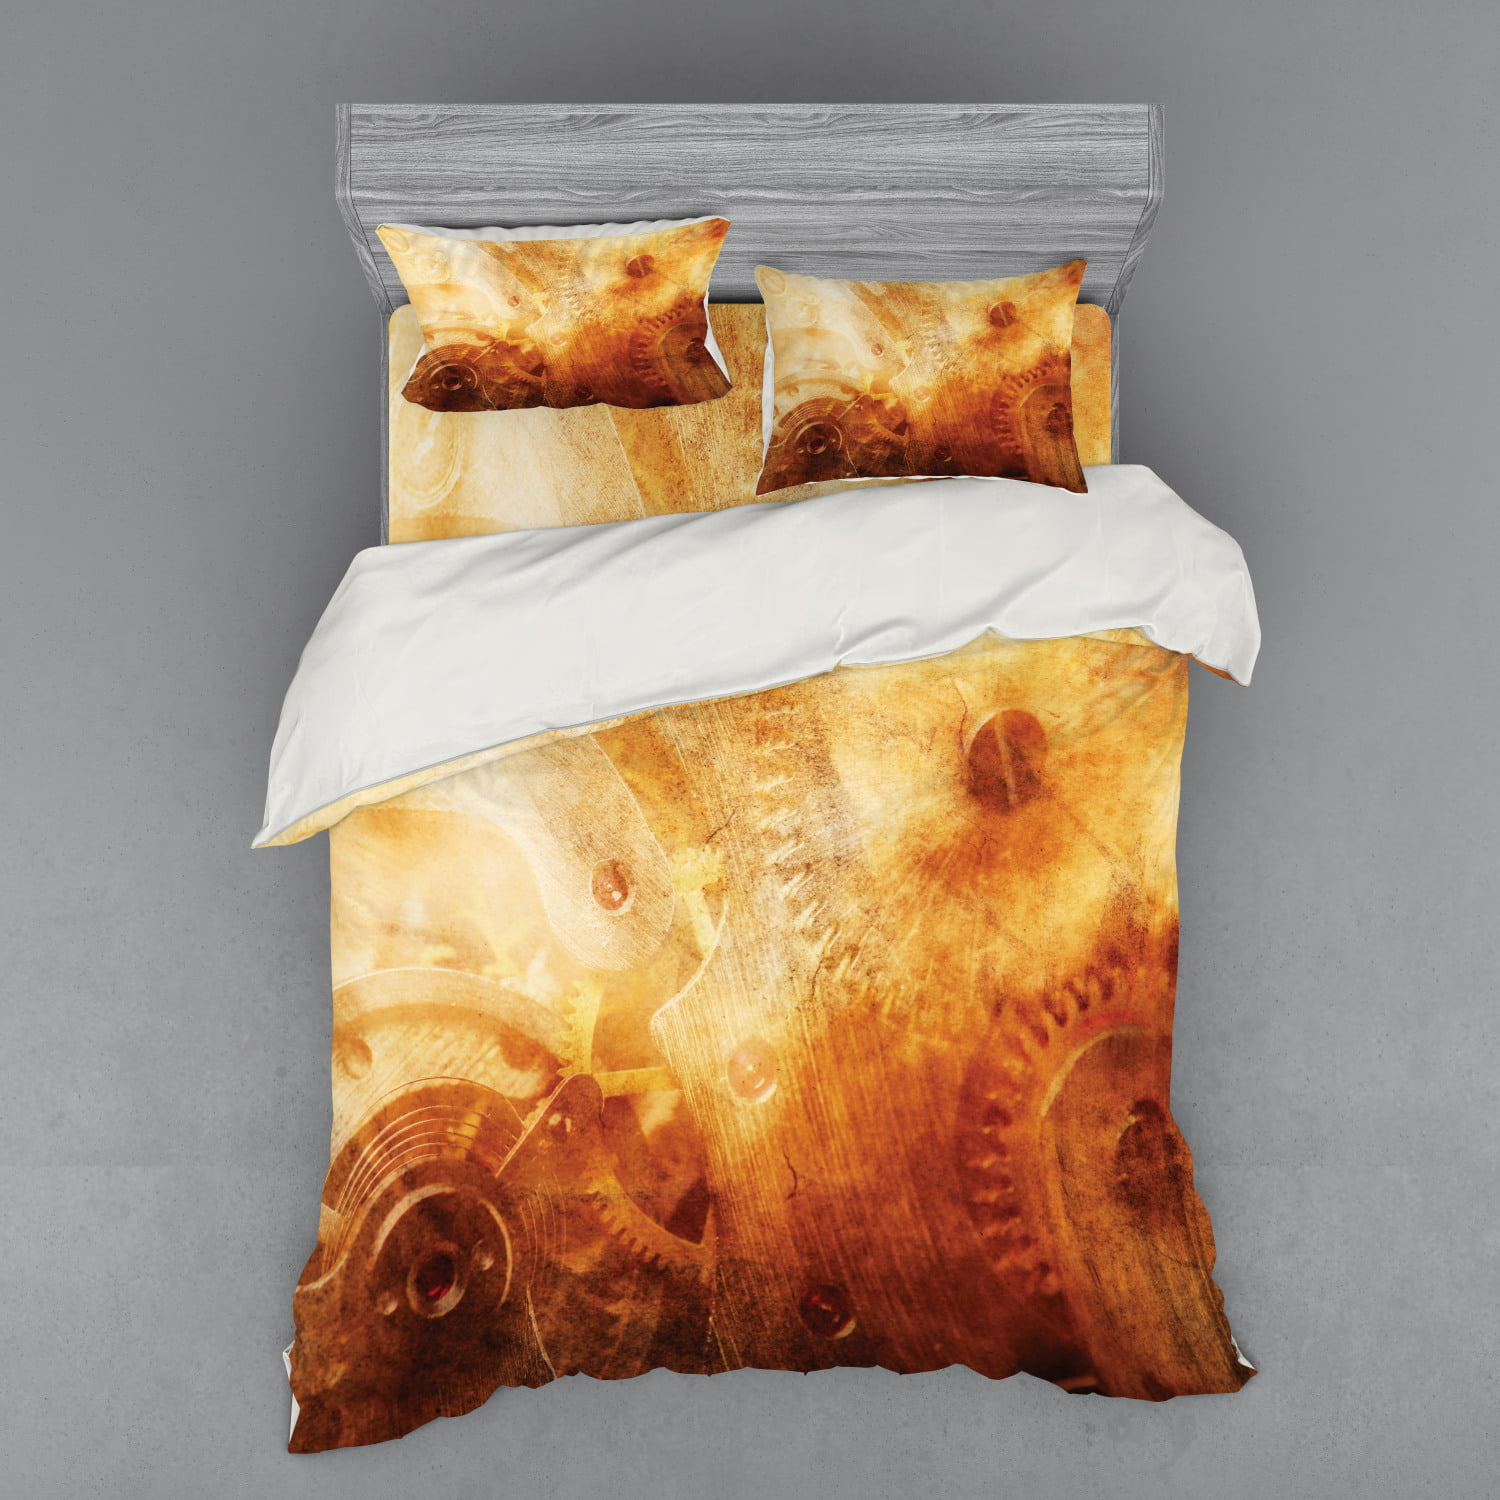 Industrial Duvet Cover Set Background Of Machinery Mechanism In